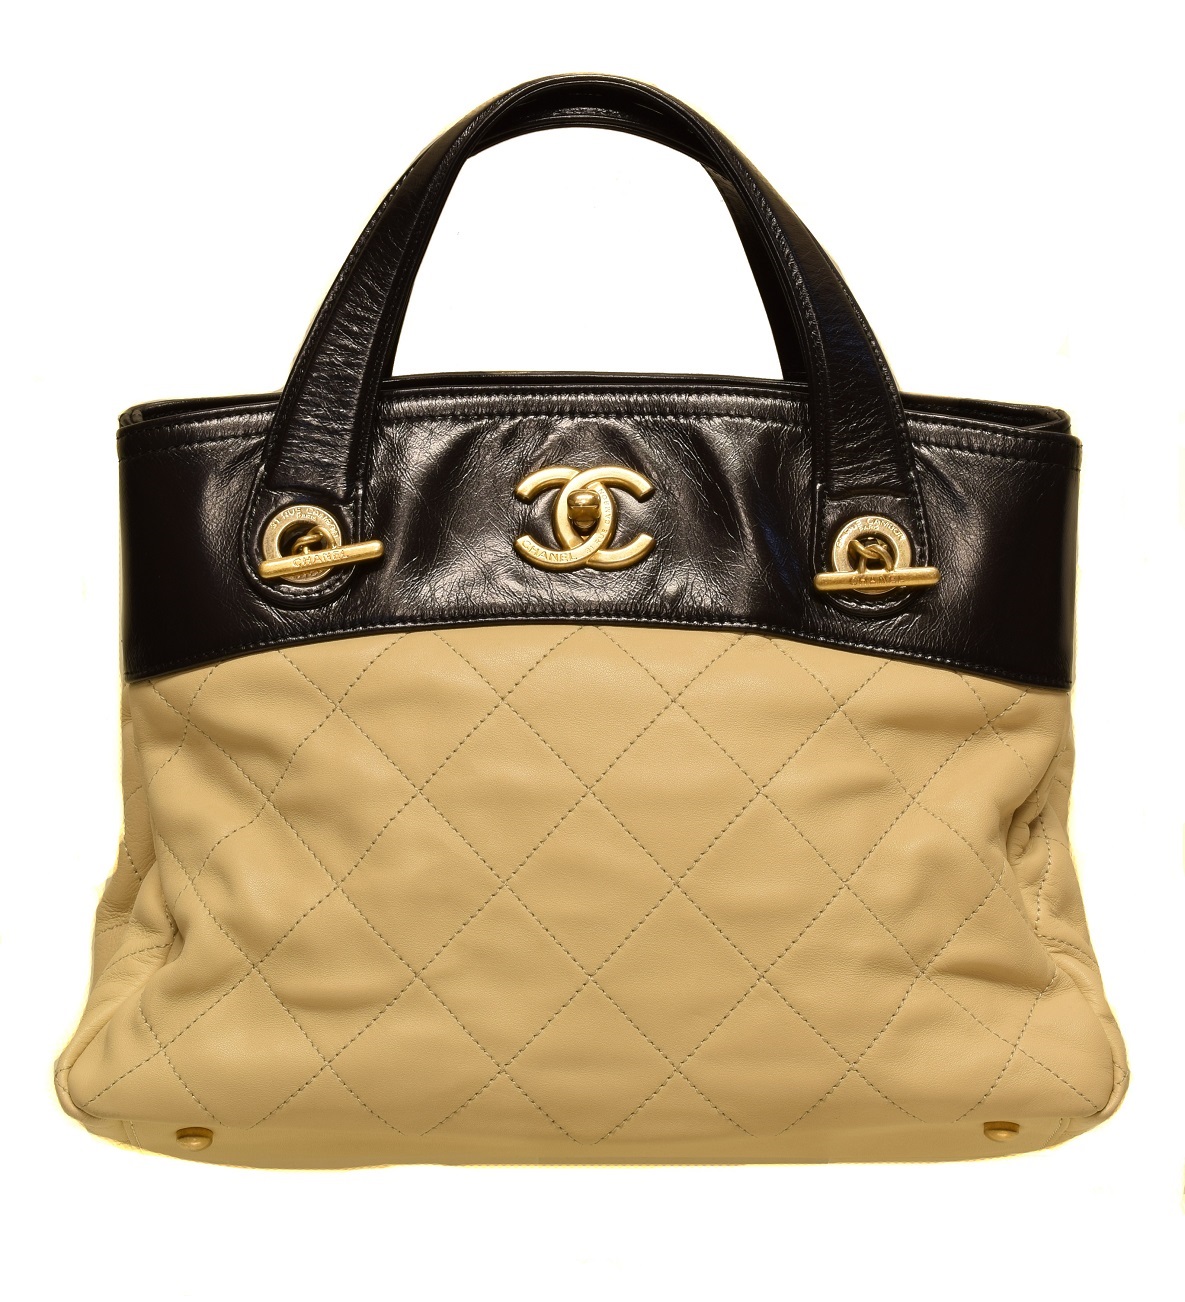 Chanel Bags